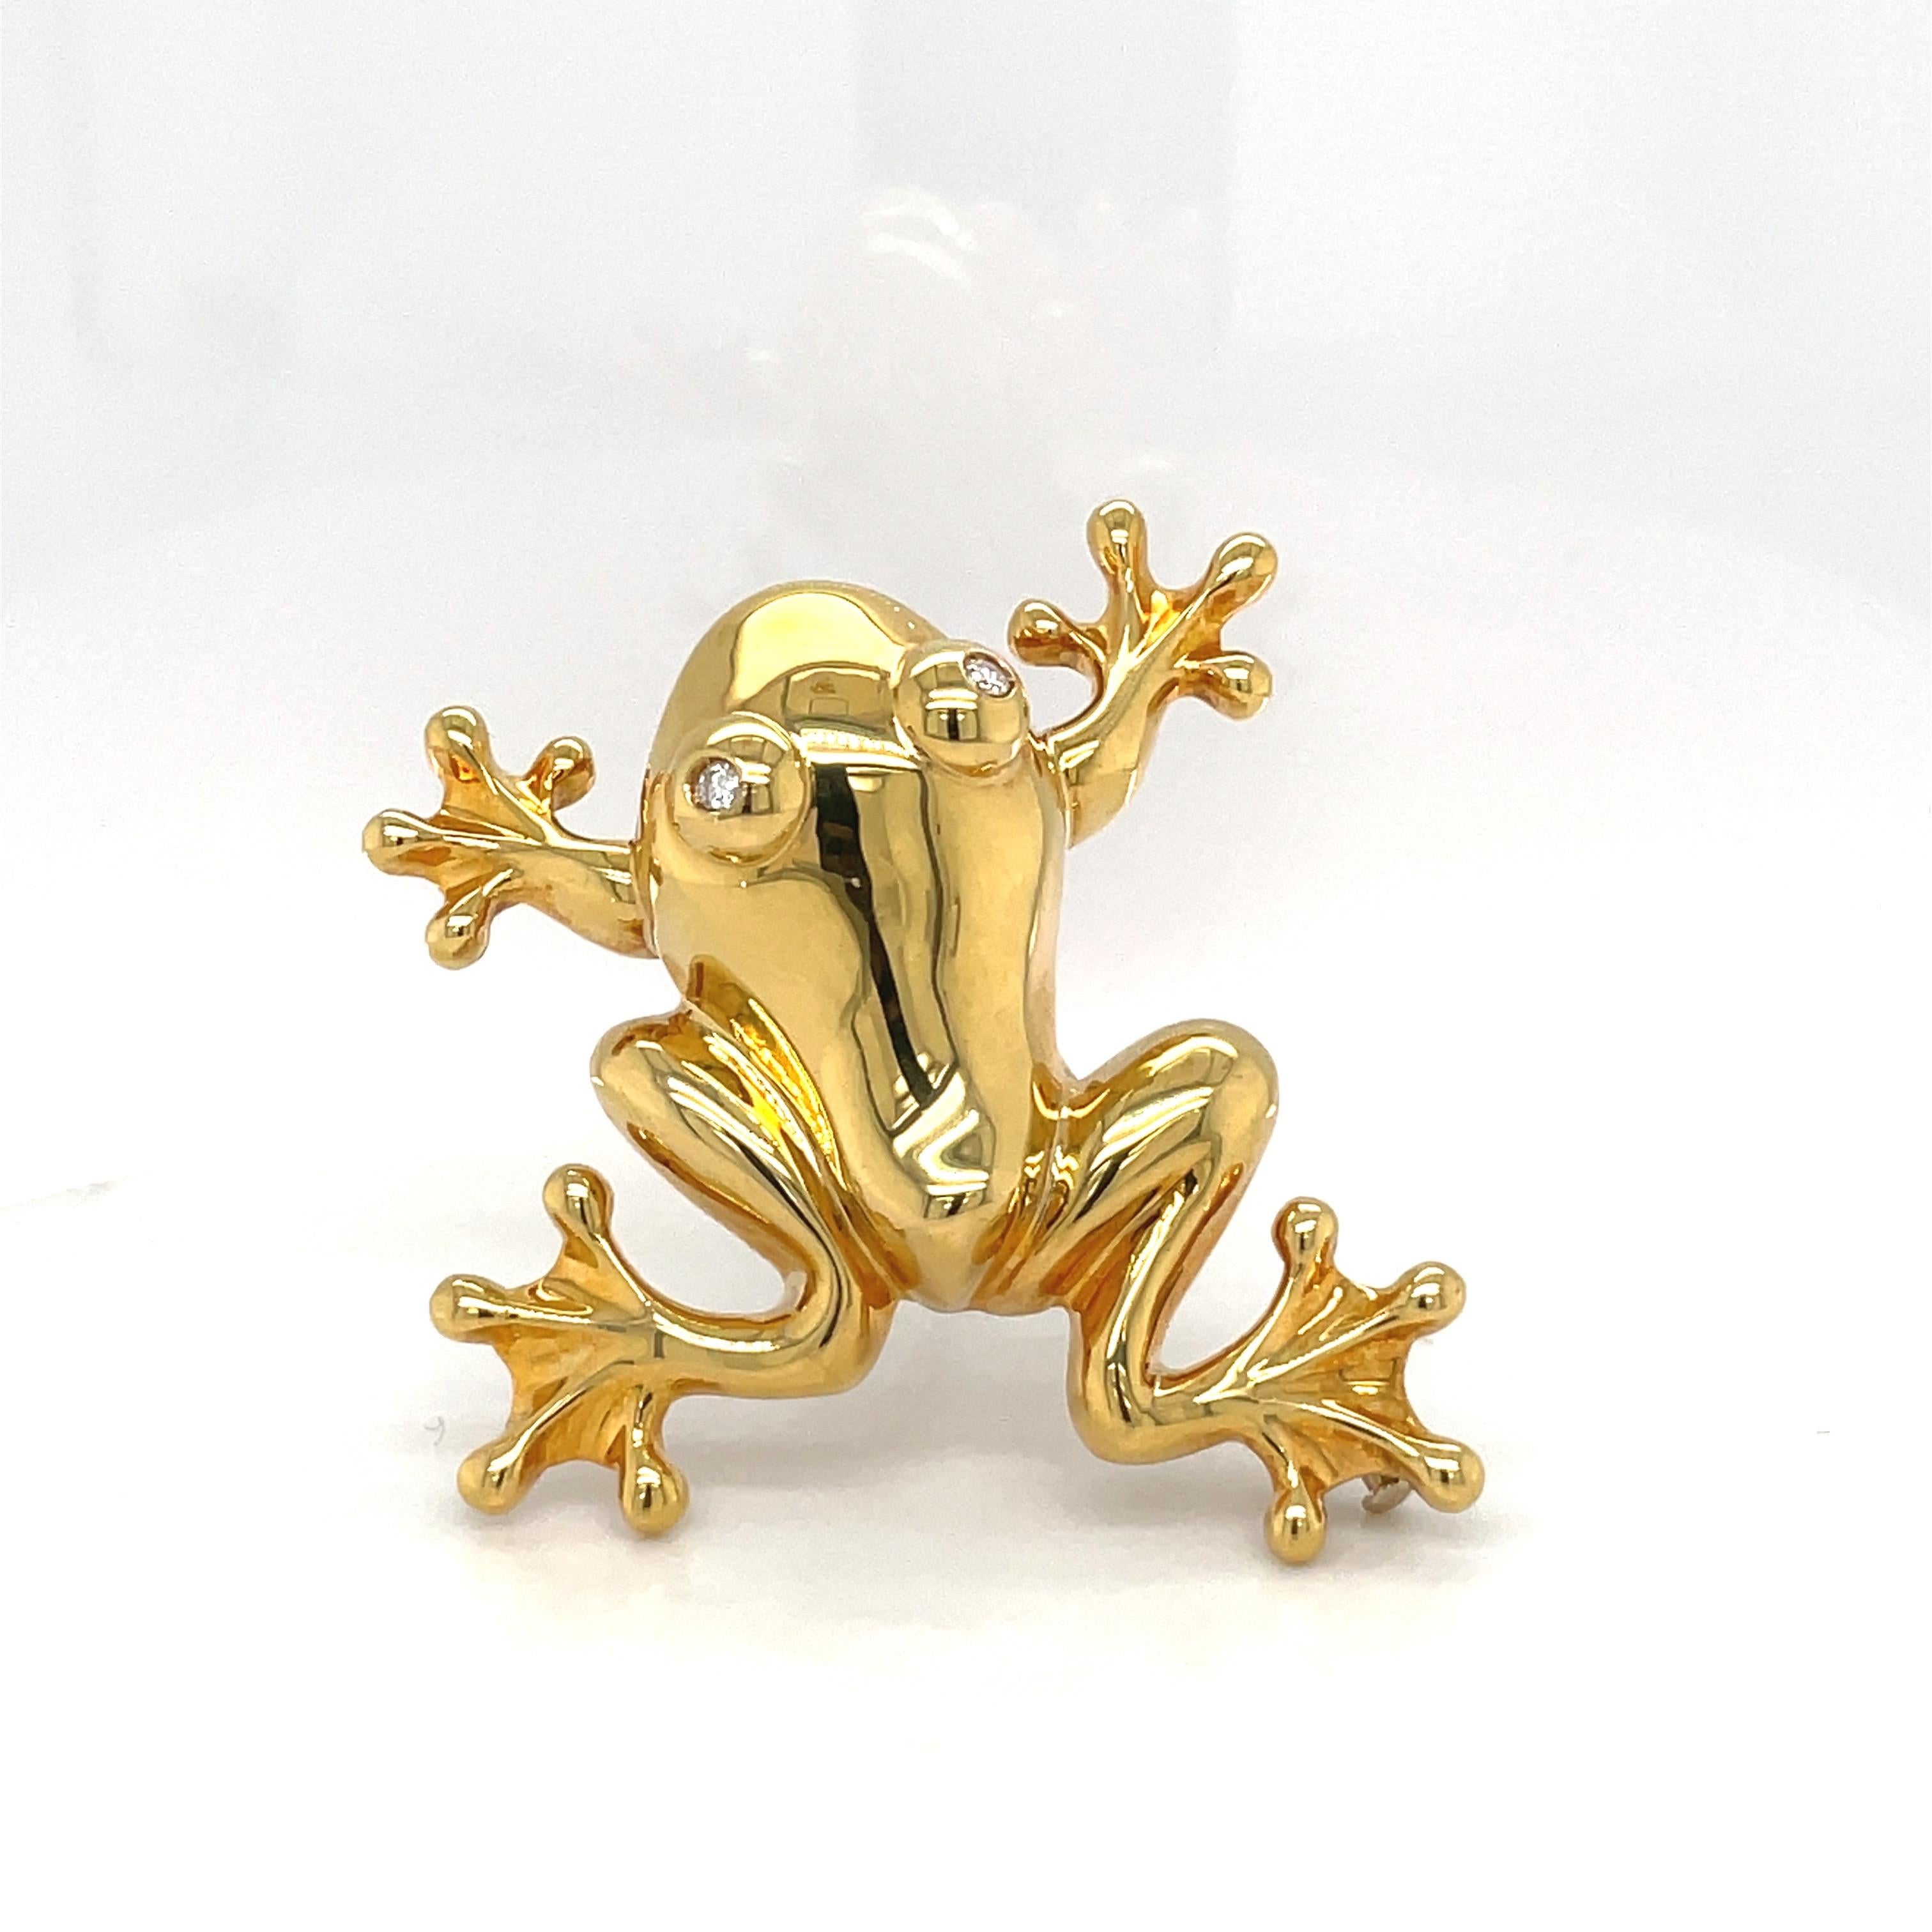 Designed in Italy by Roberto Legnazzi is a whimsical 18 karat yellow gold bullfrog brooch. The brooch is designed in a high polished yellow gold set with round brilliant diamonds for eyes. The frog measures approximately 2